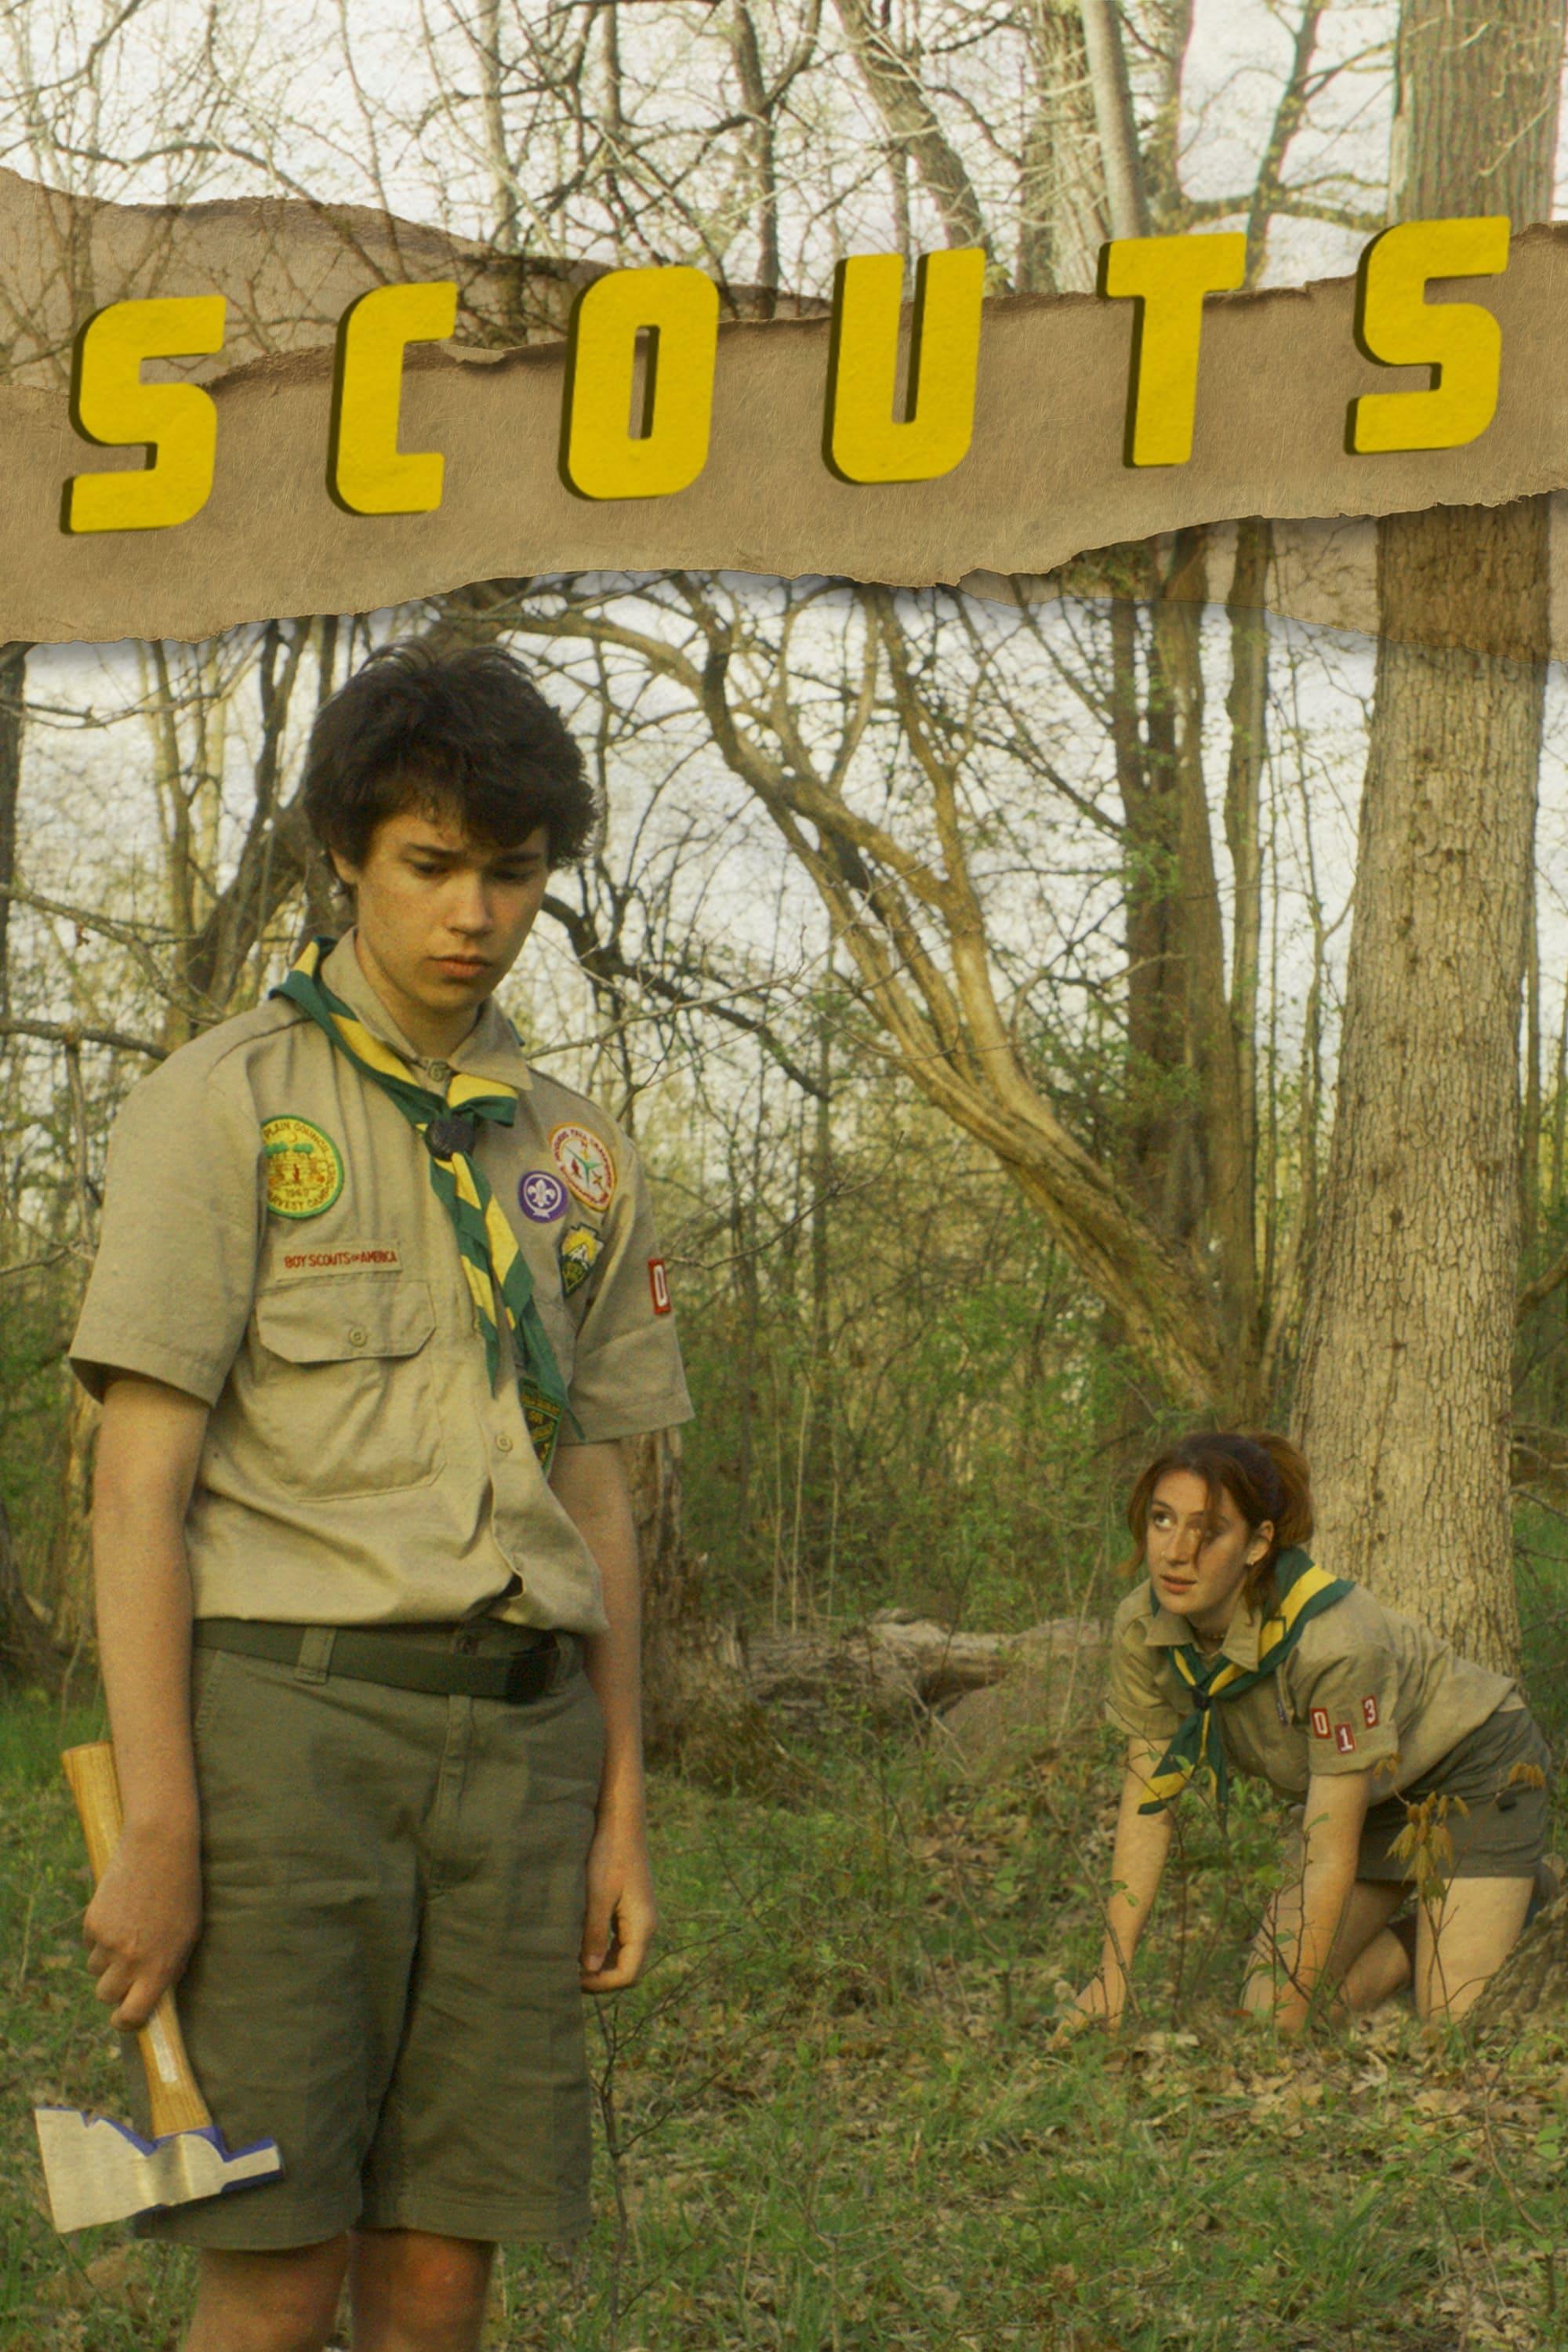 Scouts poster